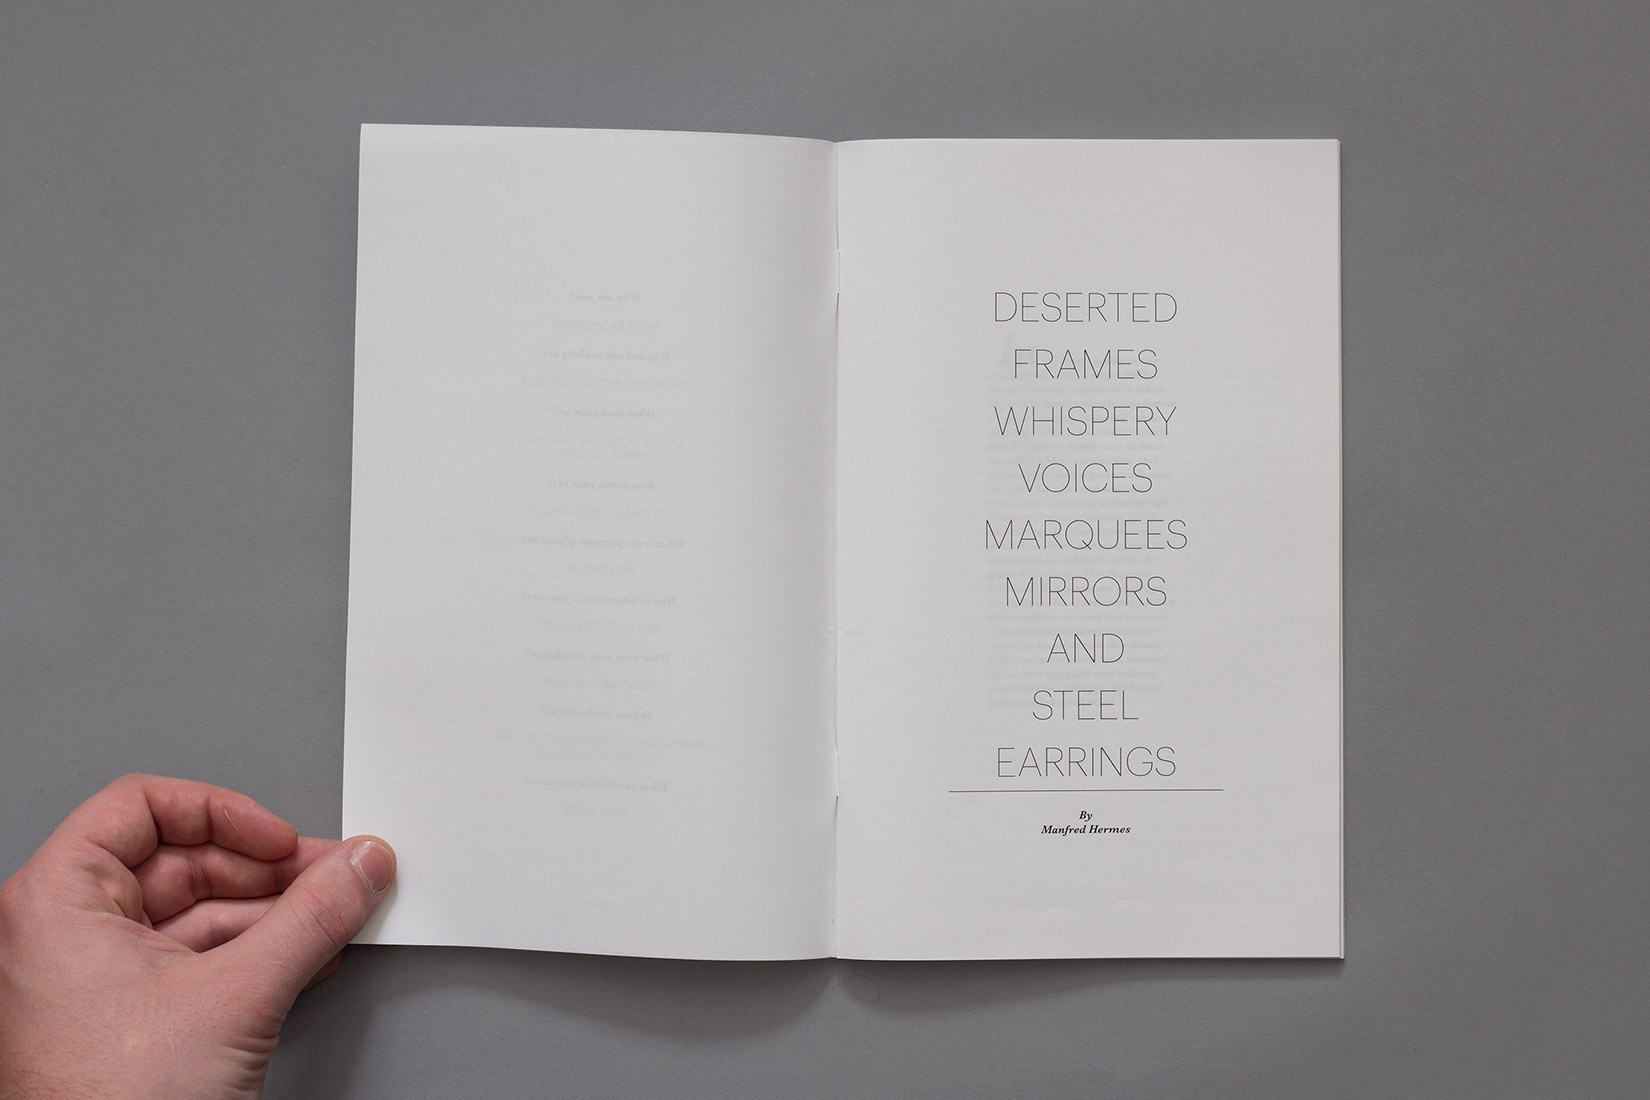 Livre d'artiste, Nairy Baghramian, typographie, Deserted frames, whispery voices, marquees and steel earings